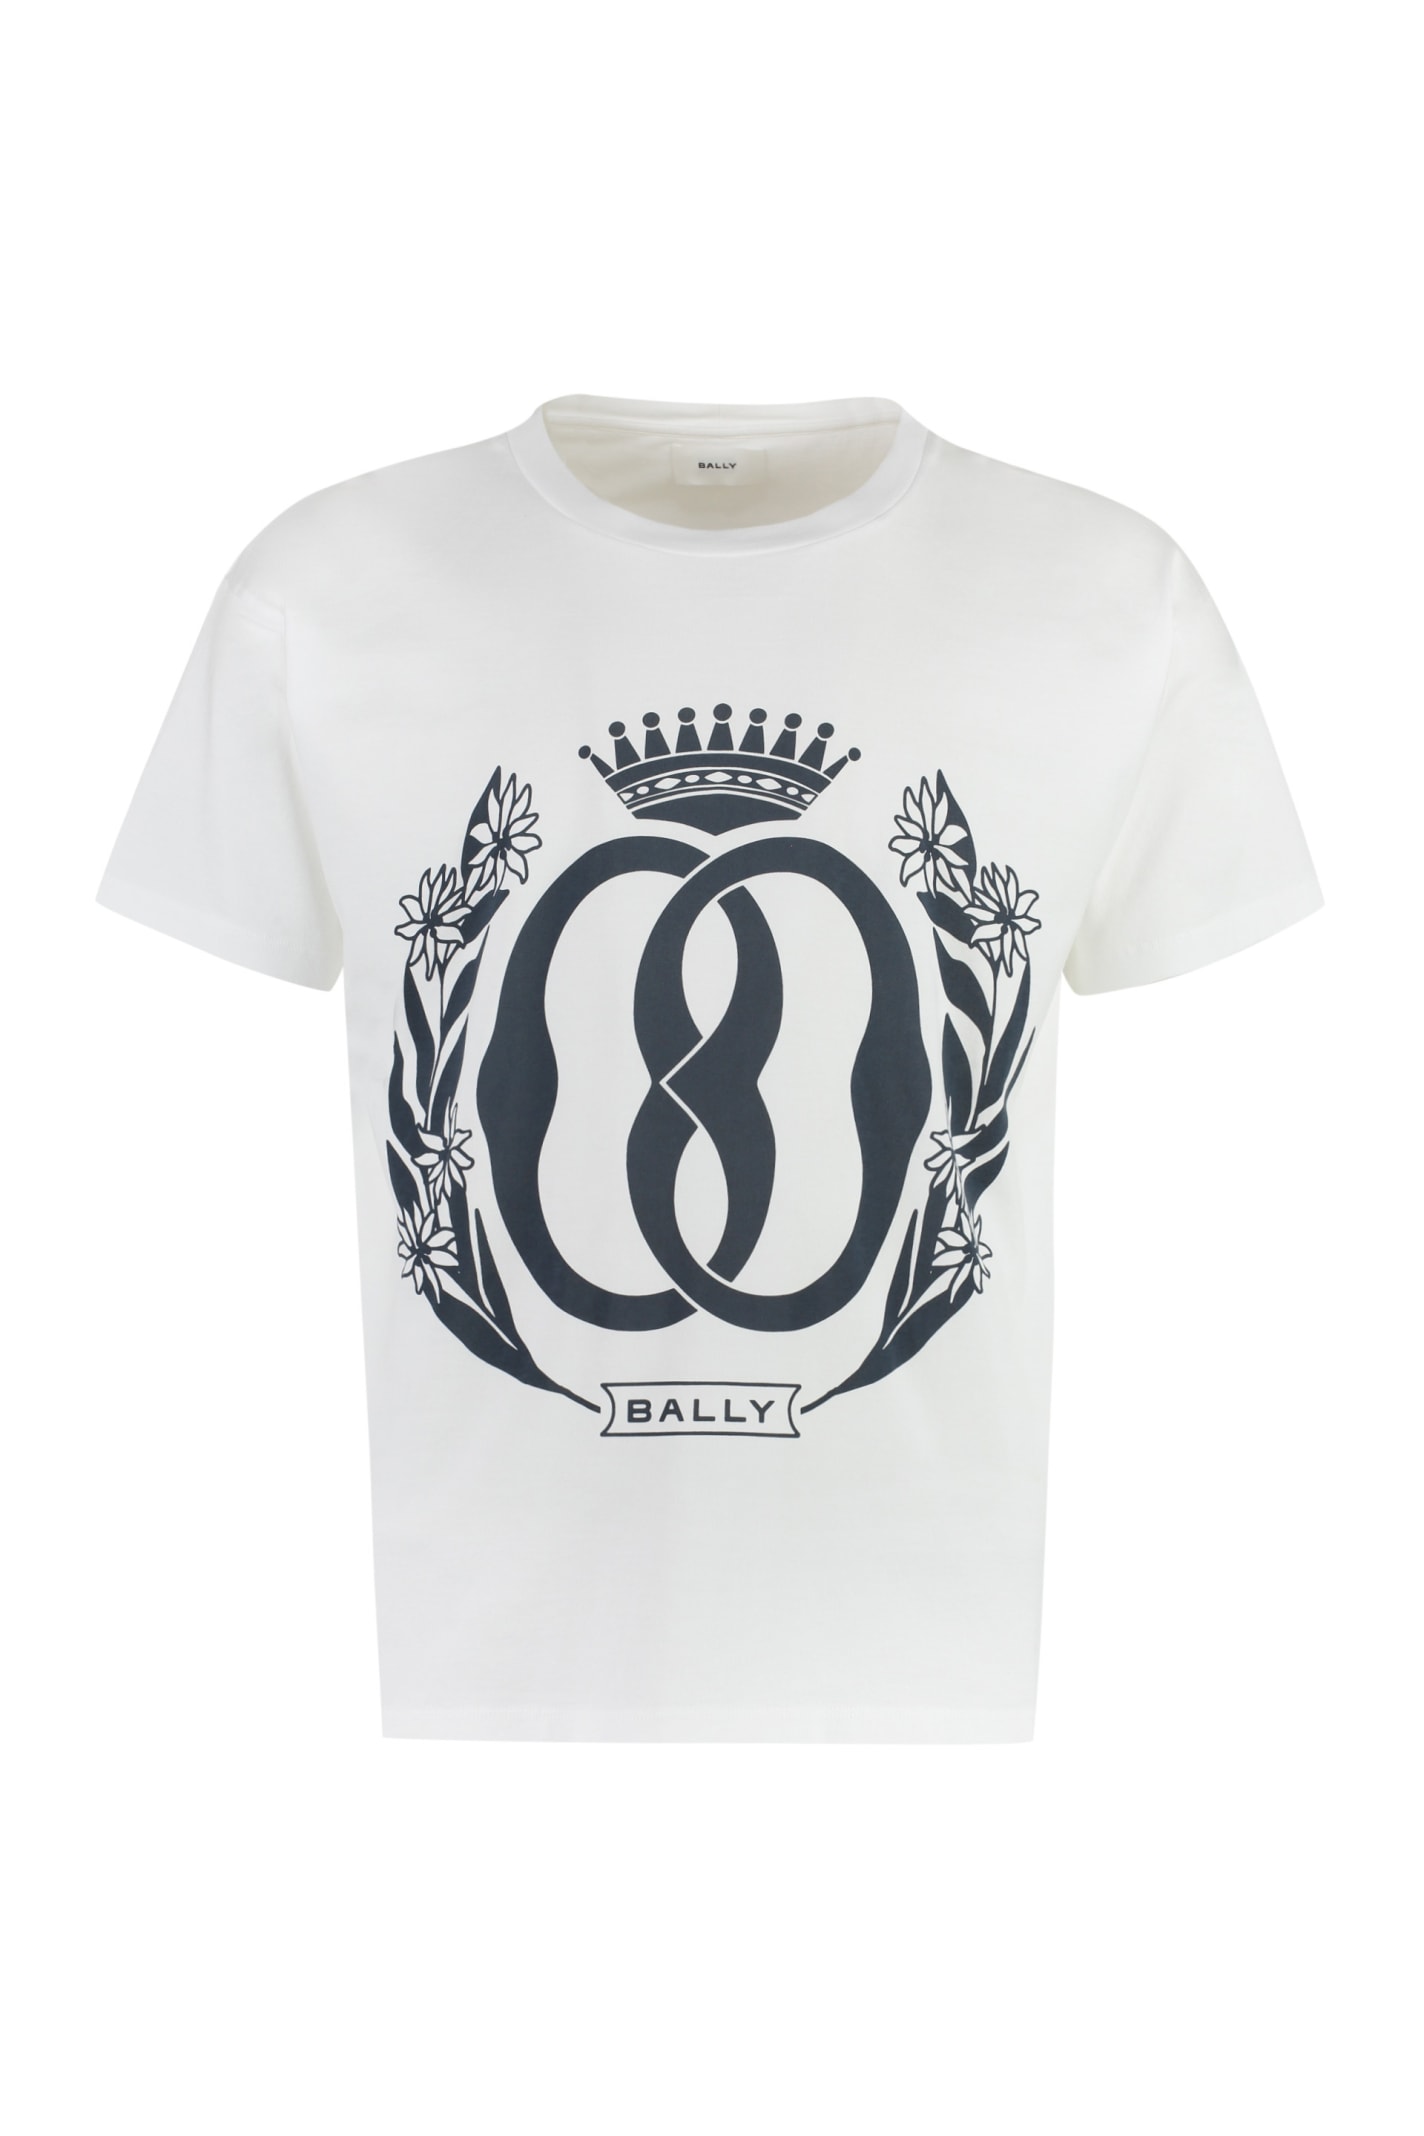 Bally Printed Cotton T-shirt In White